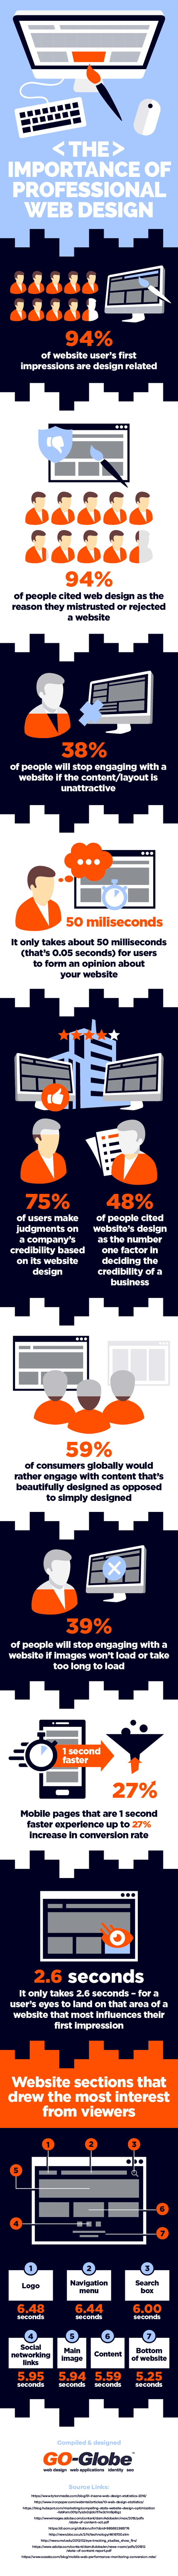 The importance of professional web design for your business website